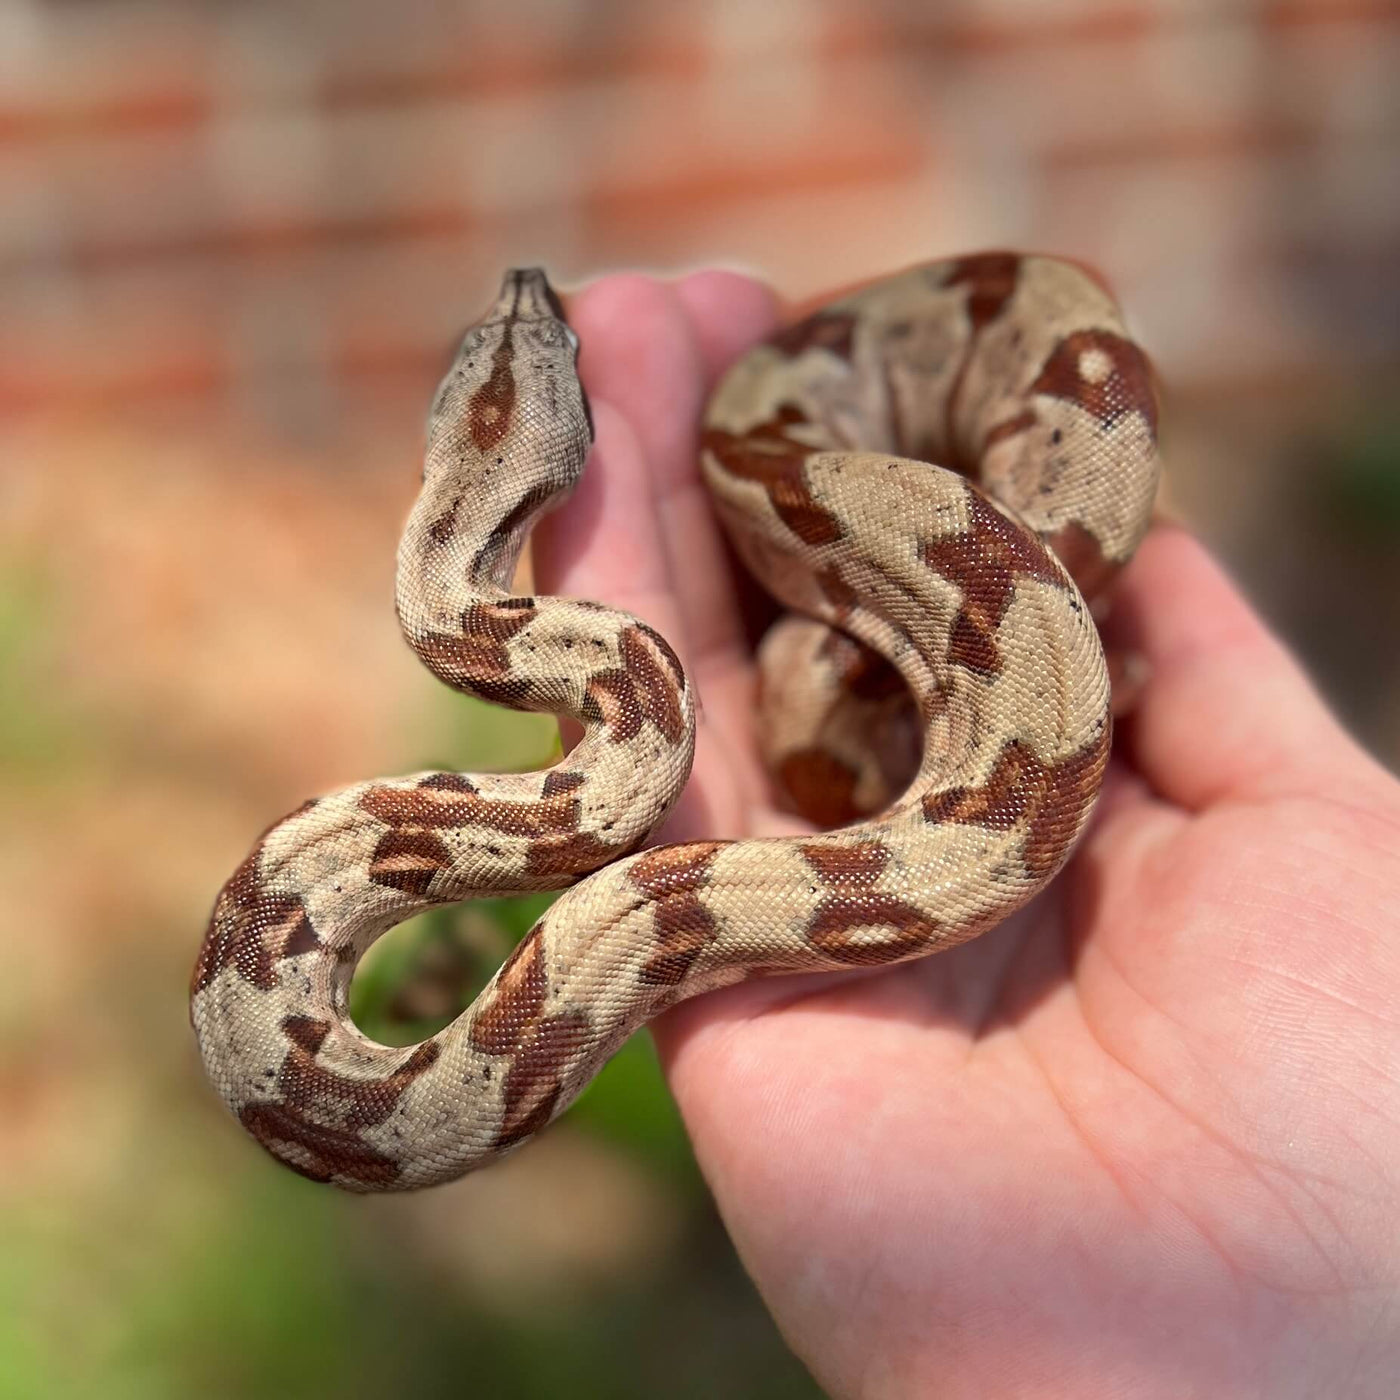 hypo boa constrictor for sale online at cheap prices, buy reptiles near me